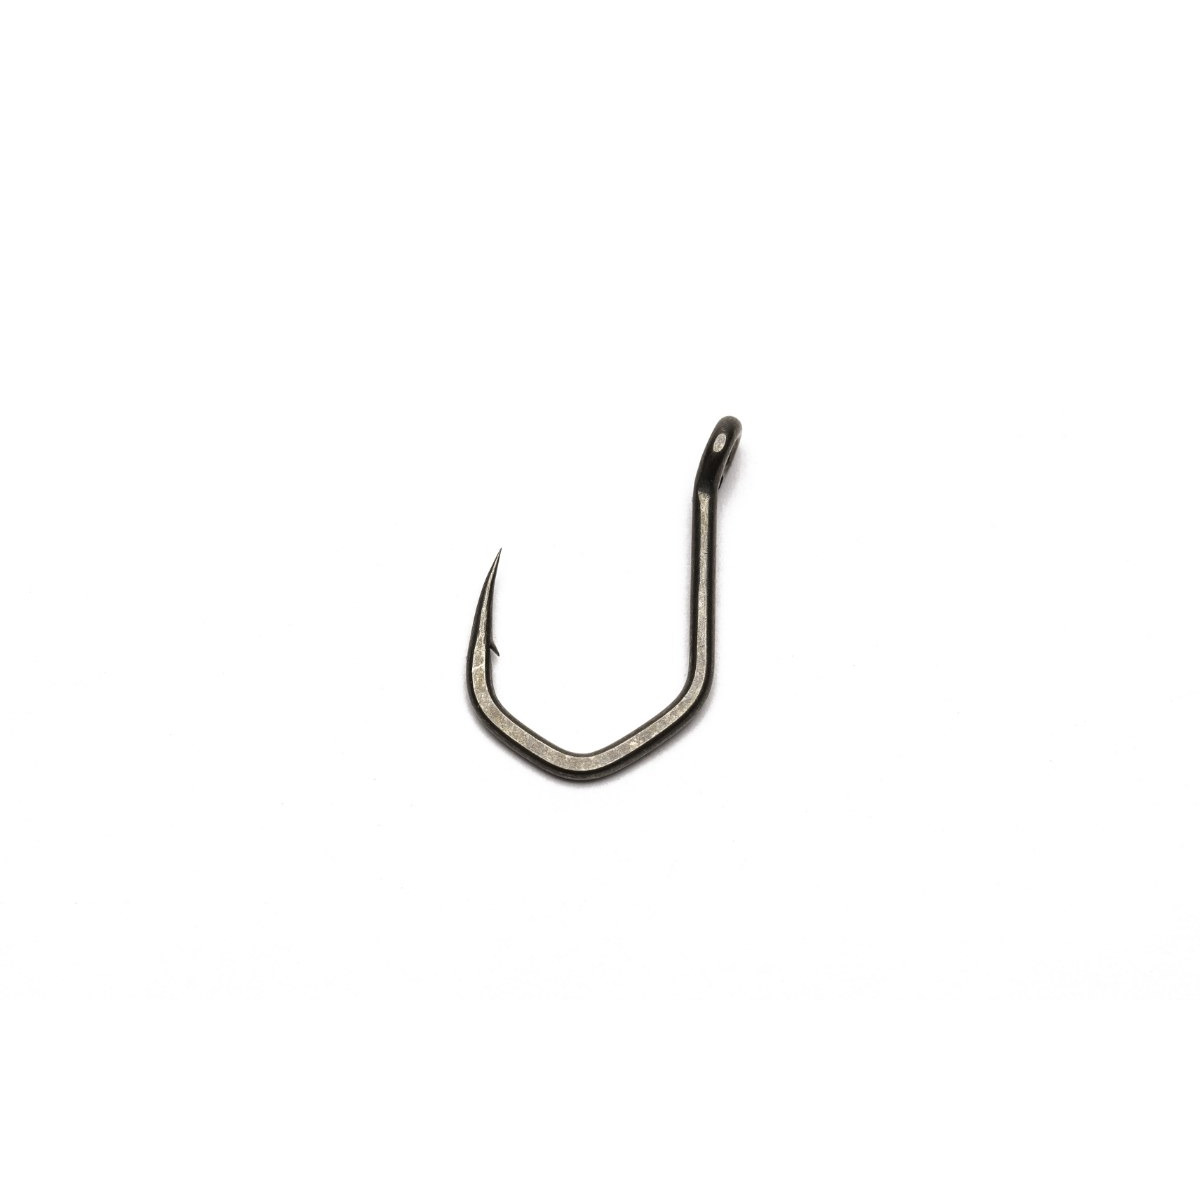 Nash Chod Claw - Size 7 Micro Barbed